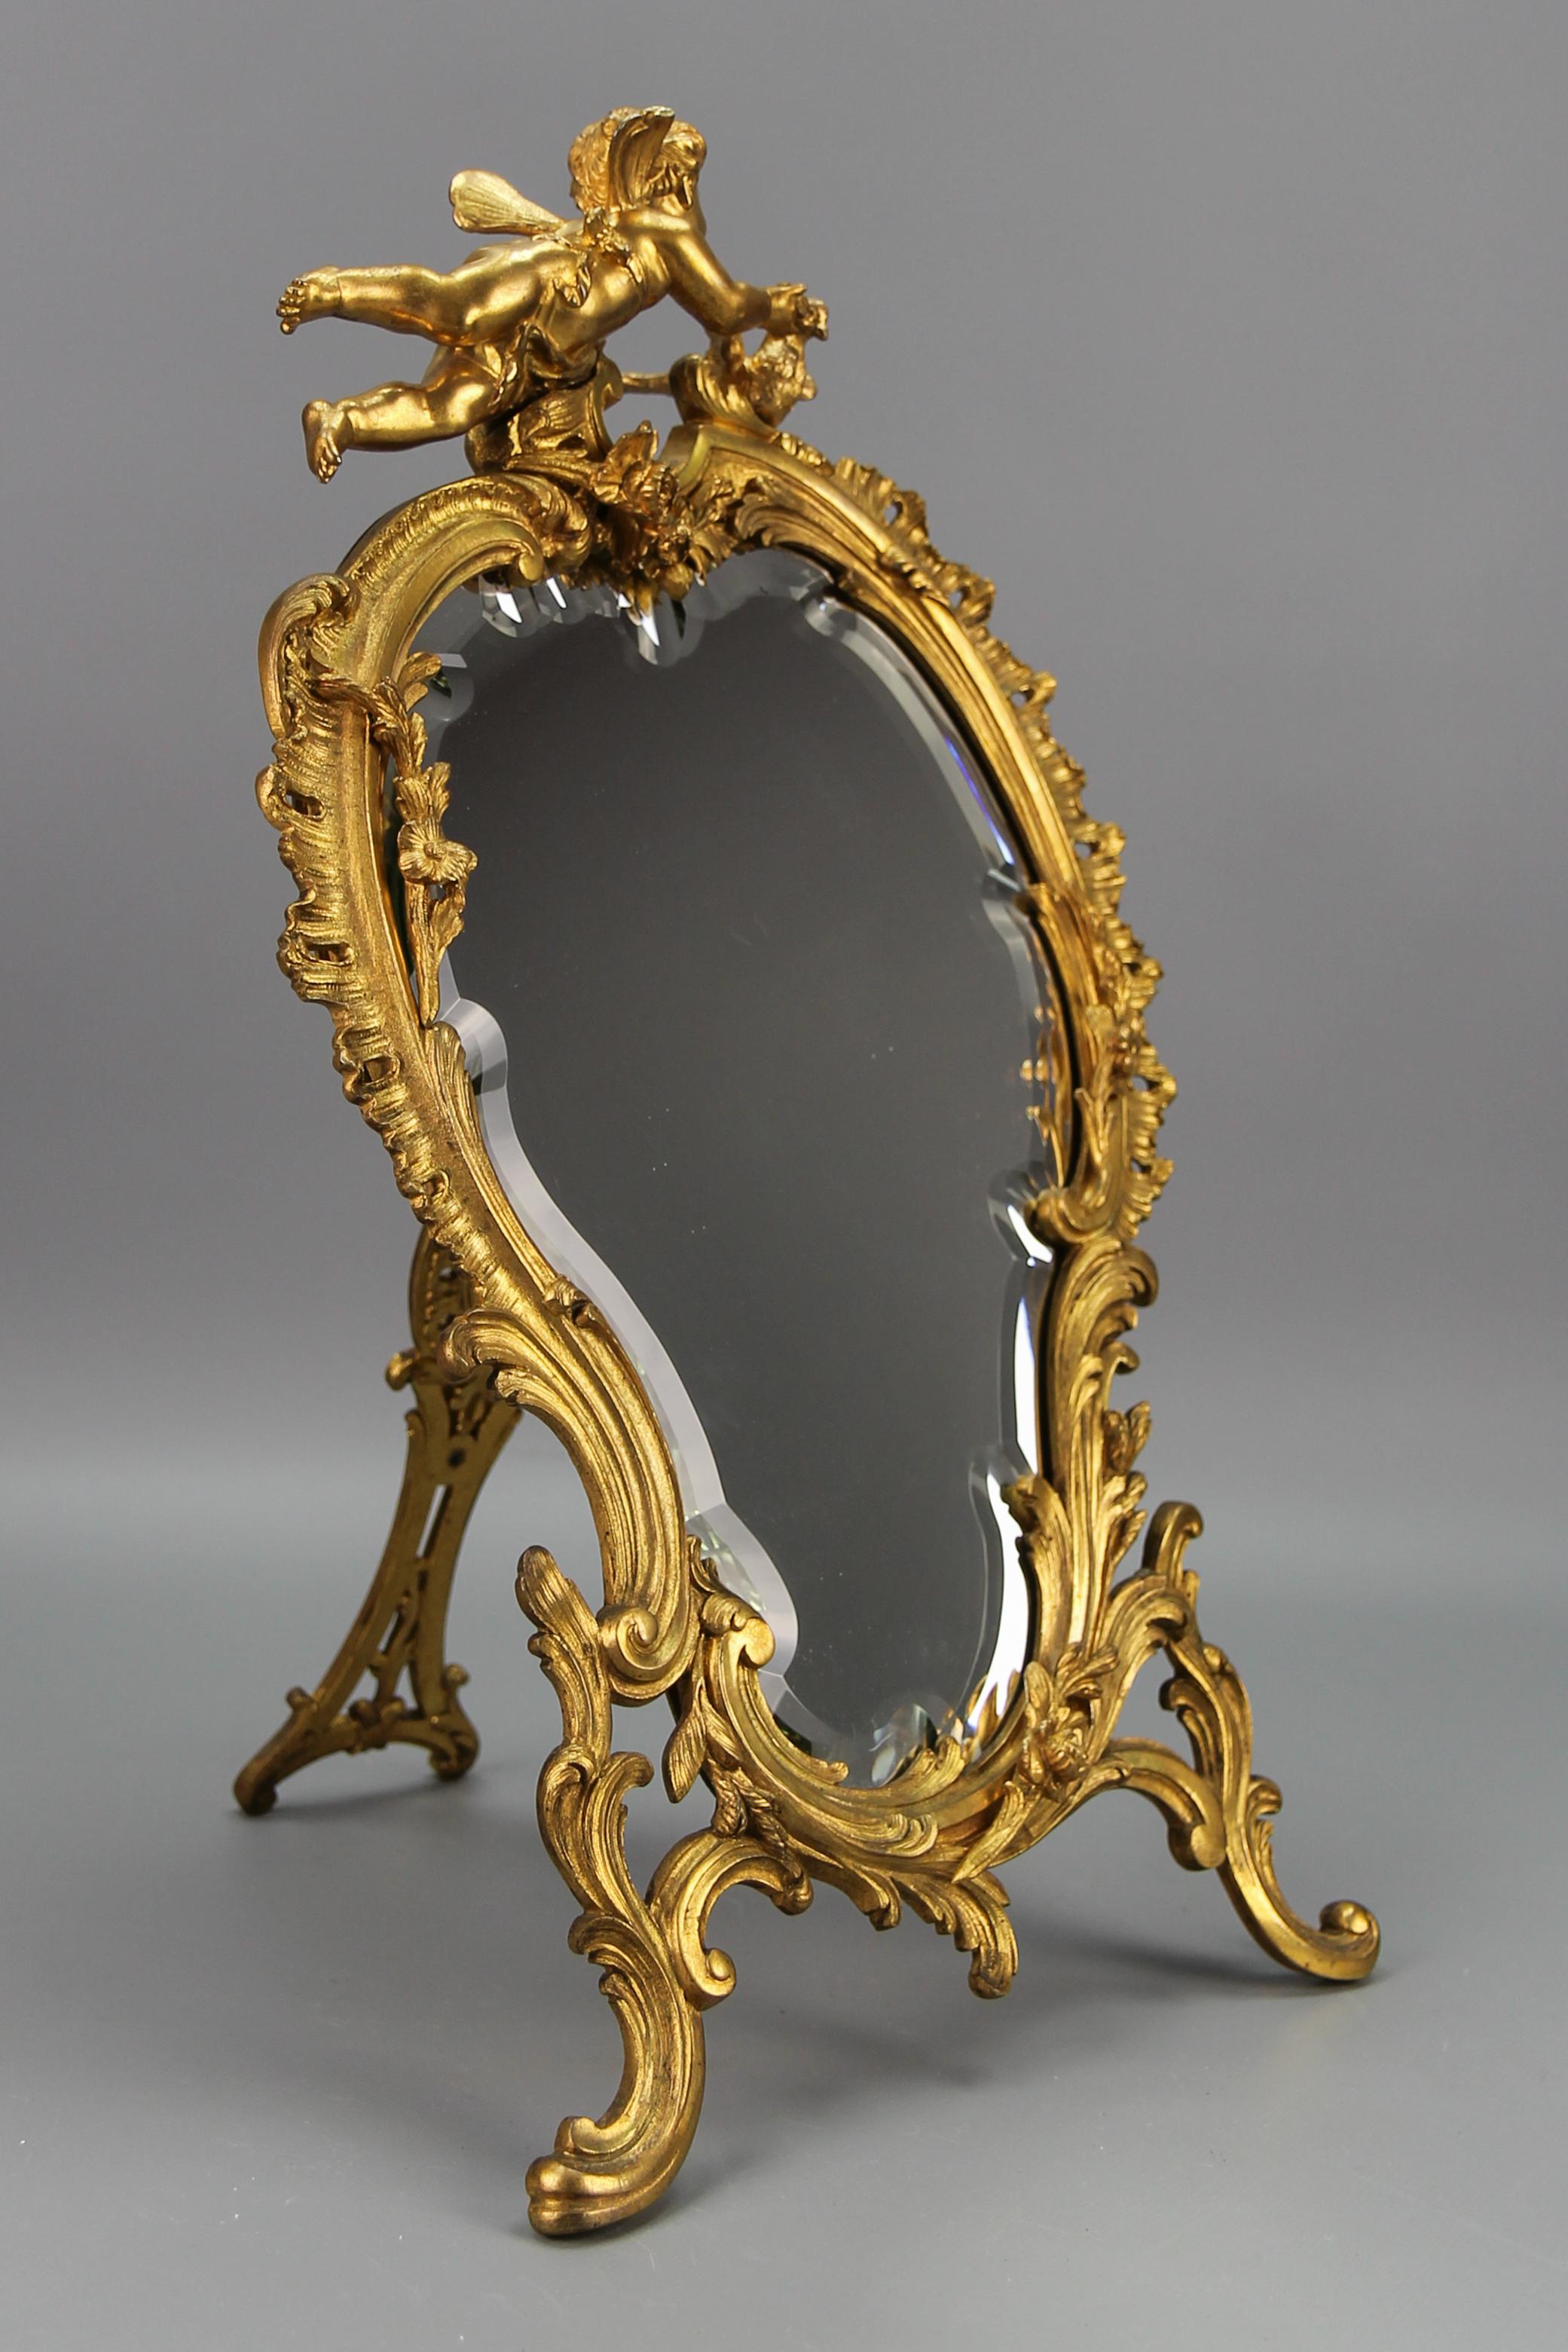 Antique French gilt bronze Rococo style desktop mirror with cherub and bird from the early 20th century.
Adorned with typical Rococo or Louis XV-style scroll, floral, and foliate motifs around the beautifully shaped and faceted mirror, this large